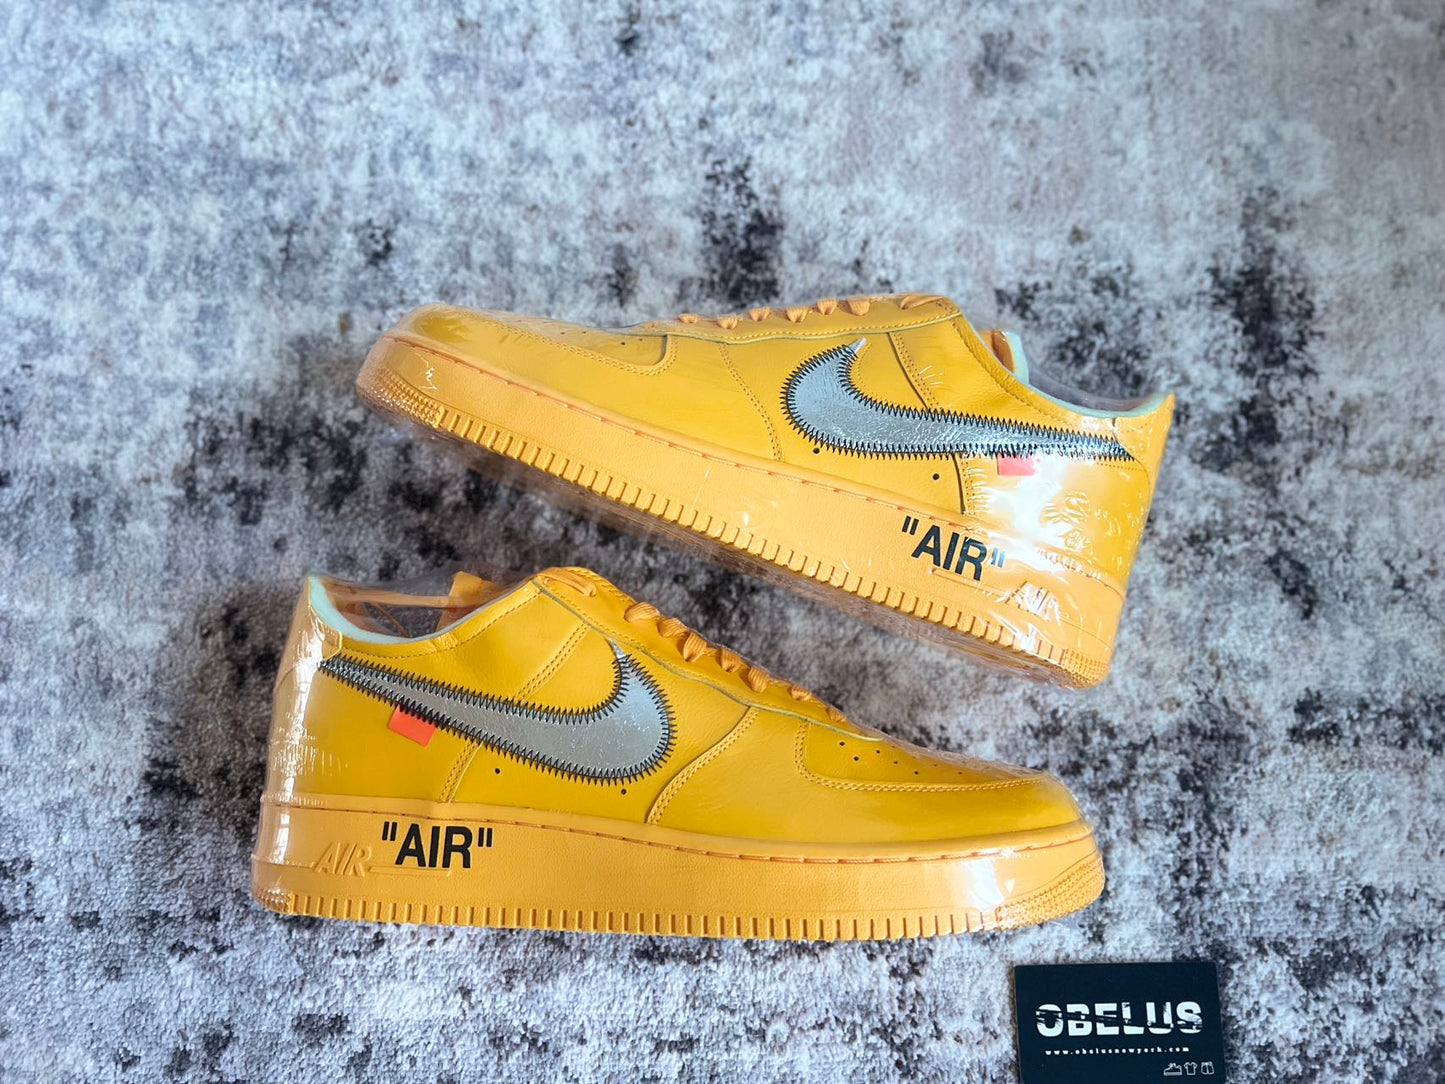 Nike, Shoes, Nike Air Force Low Offwhite Ica University Gold